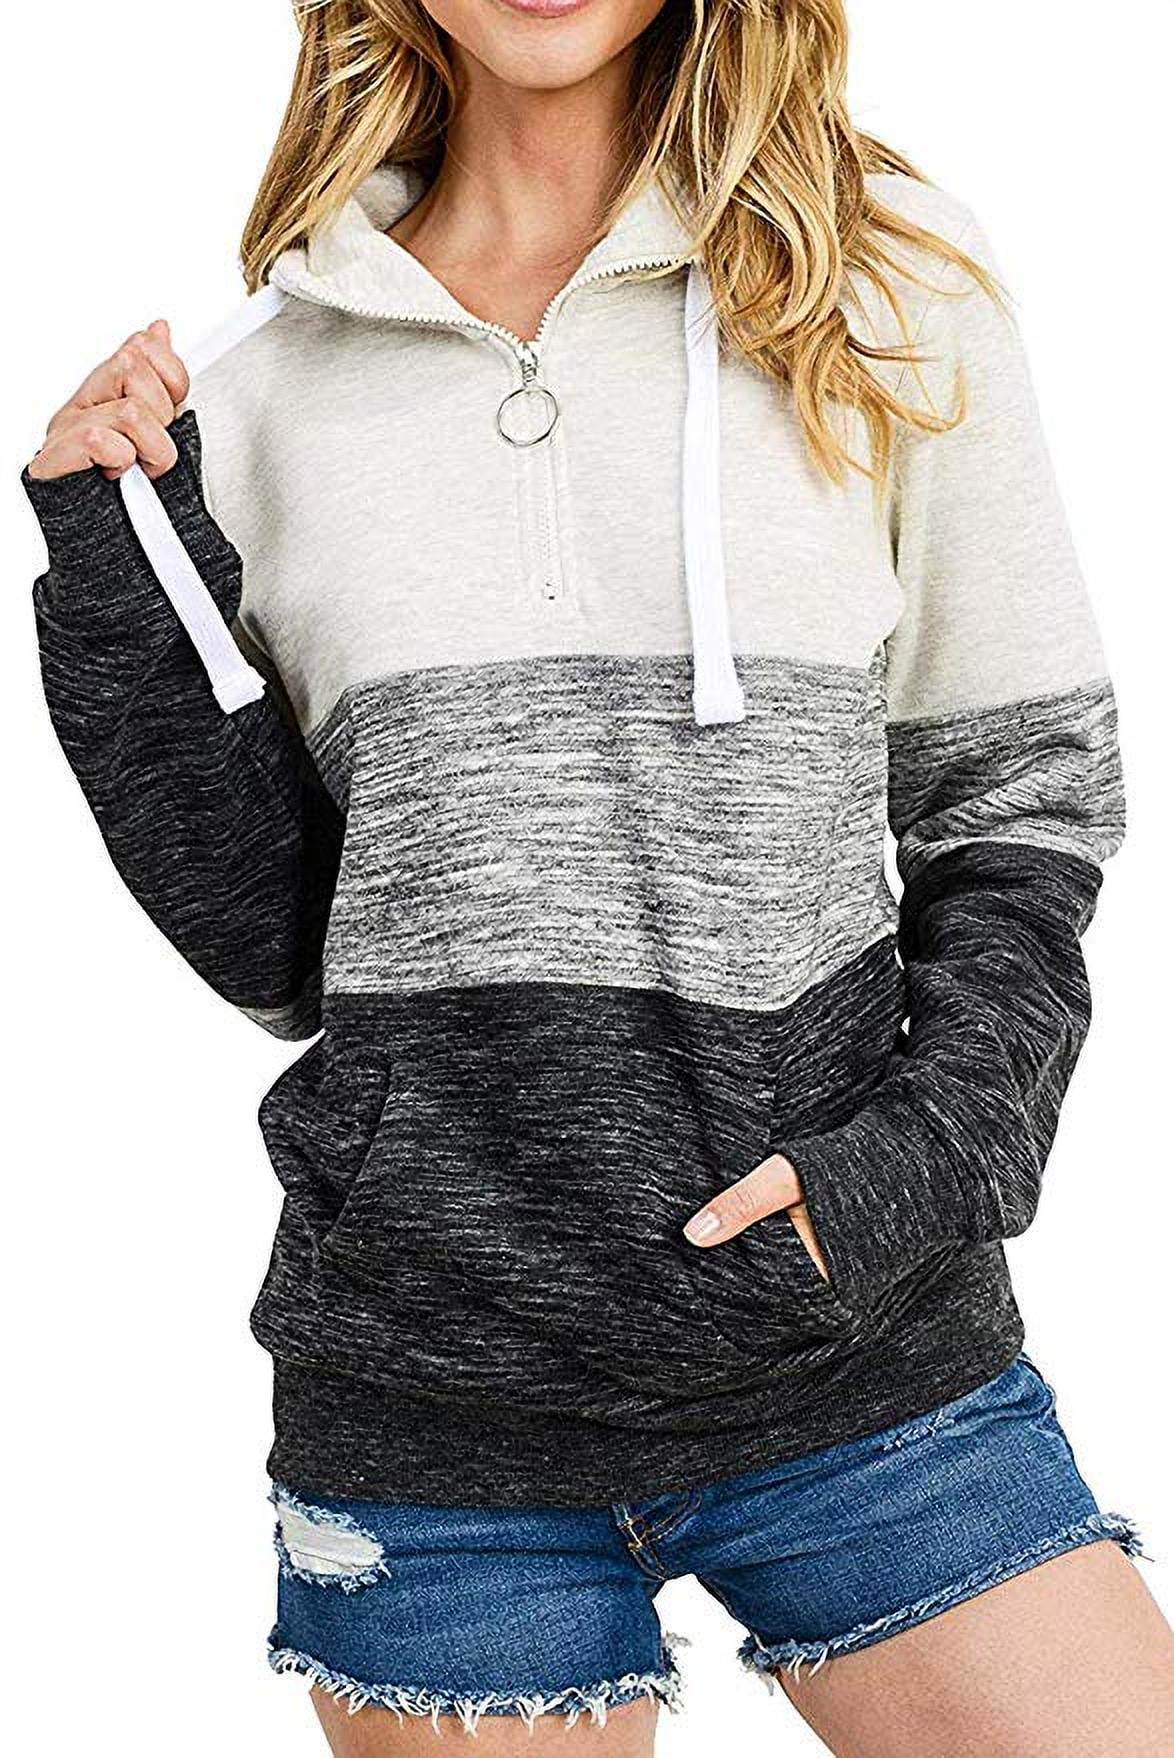 Womens Lightweight 1/4 Zip Pullover Tops Stand Collar Drawstring Tunic Sweatshirts with Pockets 